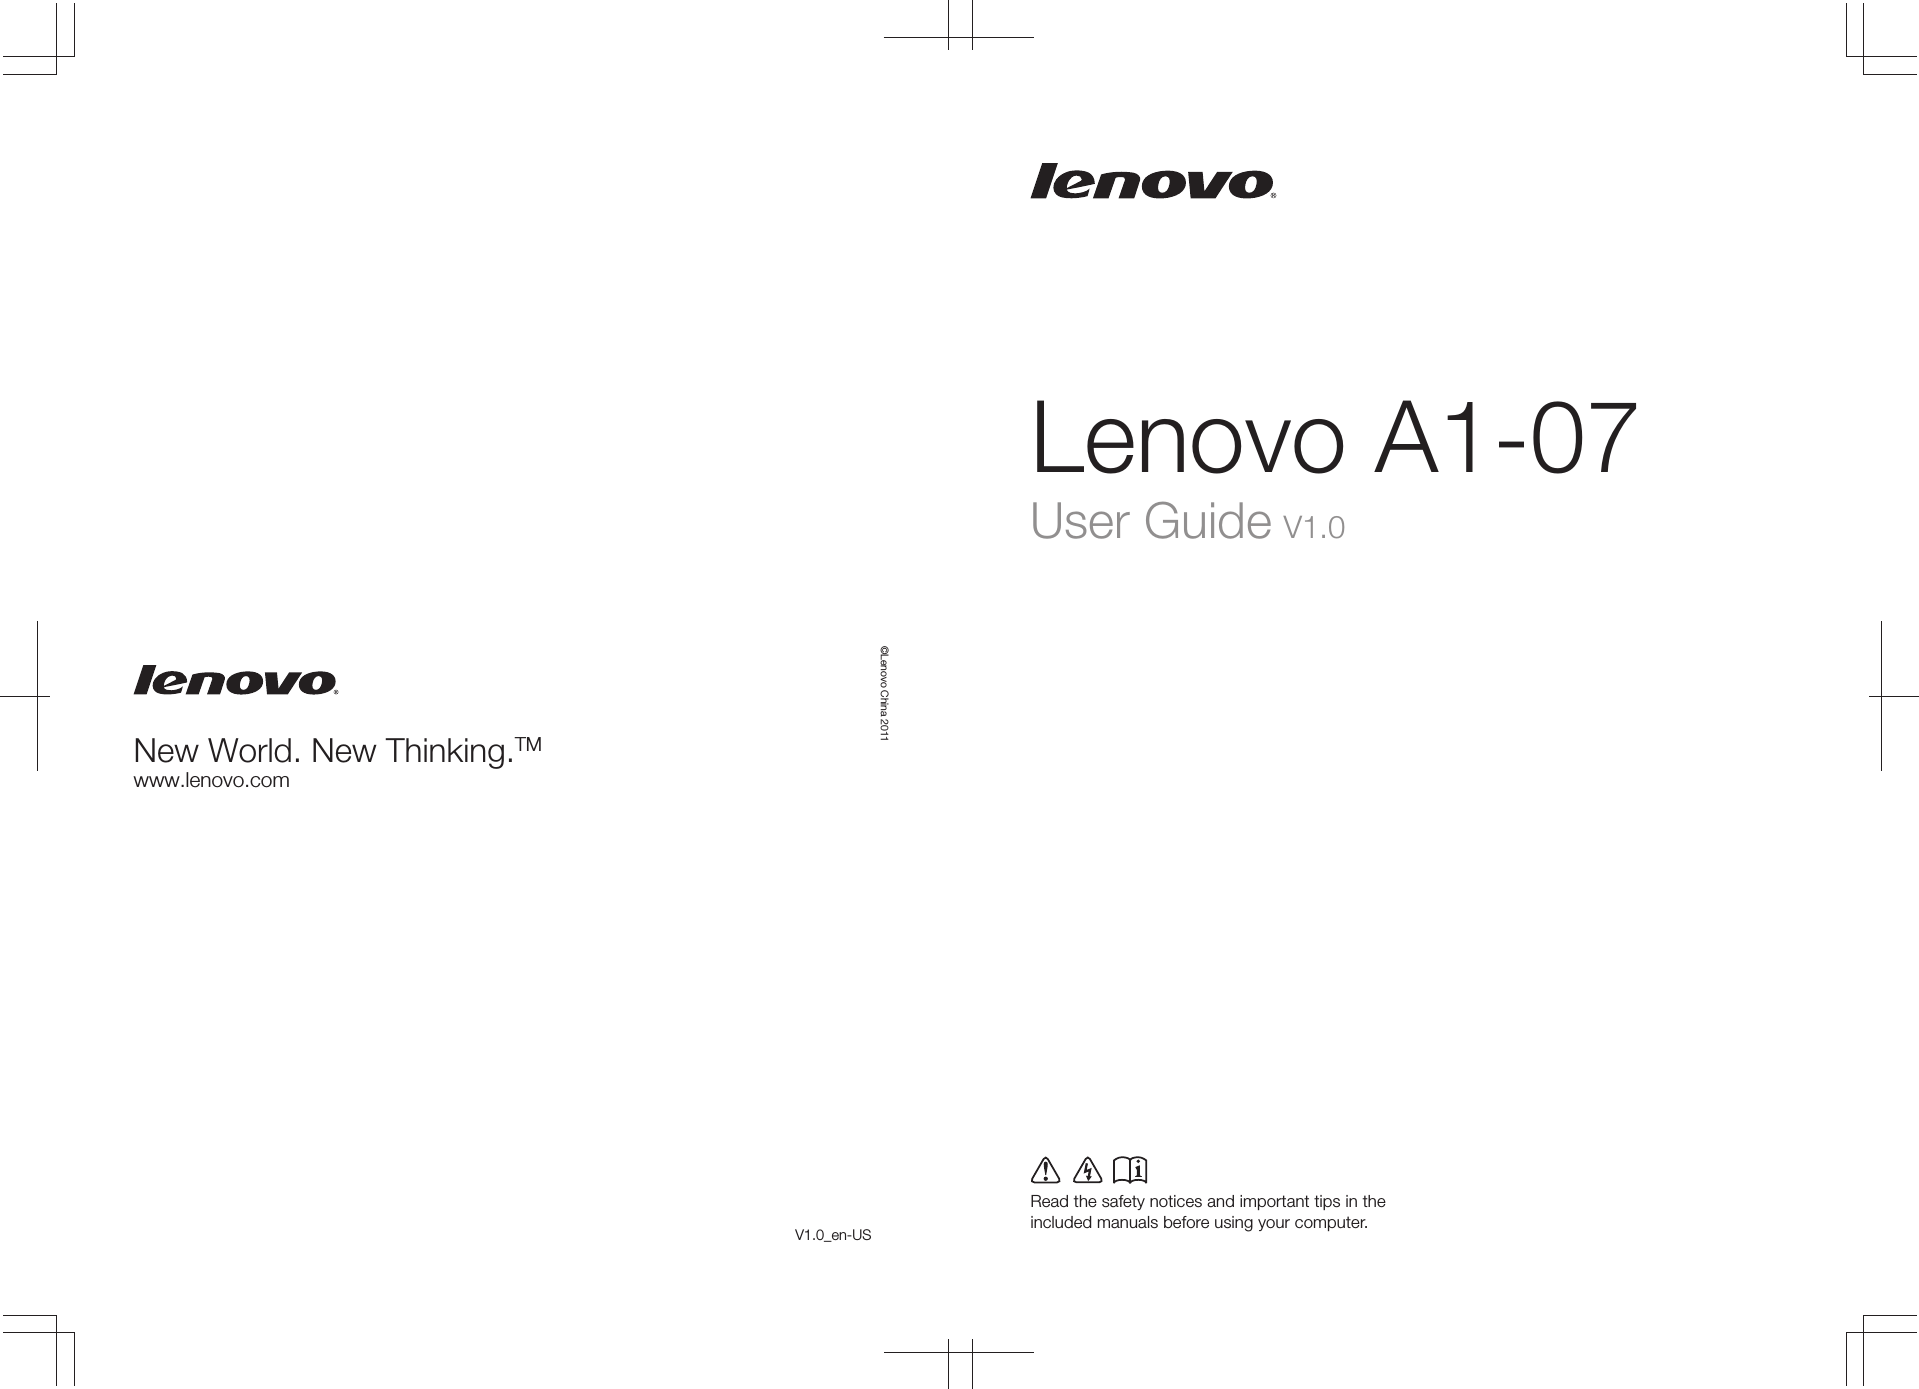 Lenovo A1-07Read the safety notices and important tips in the included manuals before using your computer.©Lenovo China 2011New World. New Thinking.TMwww.lenovo.comUser Guide V1.0V1.0_en-US